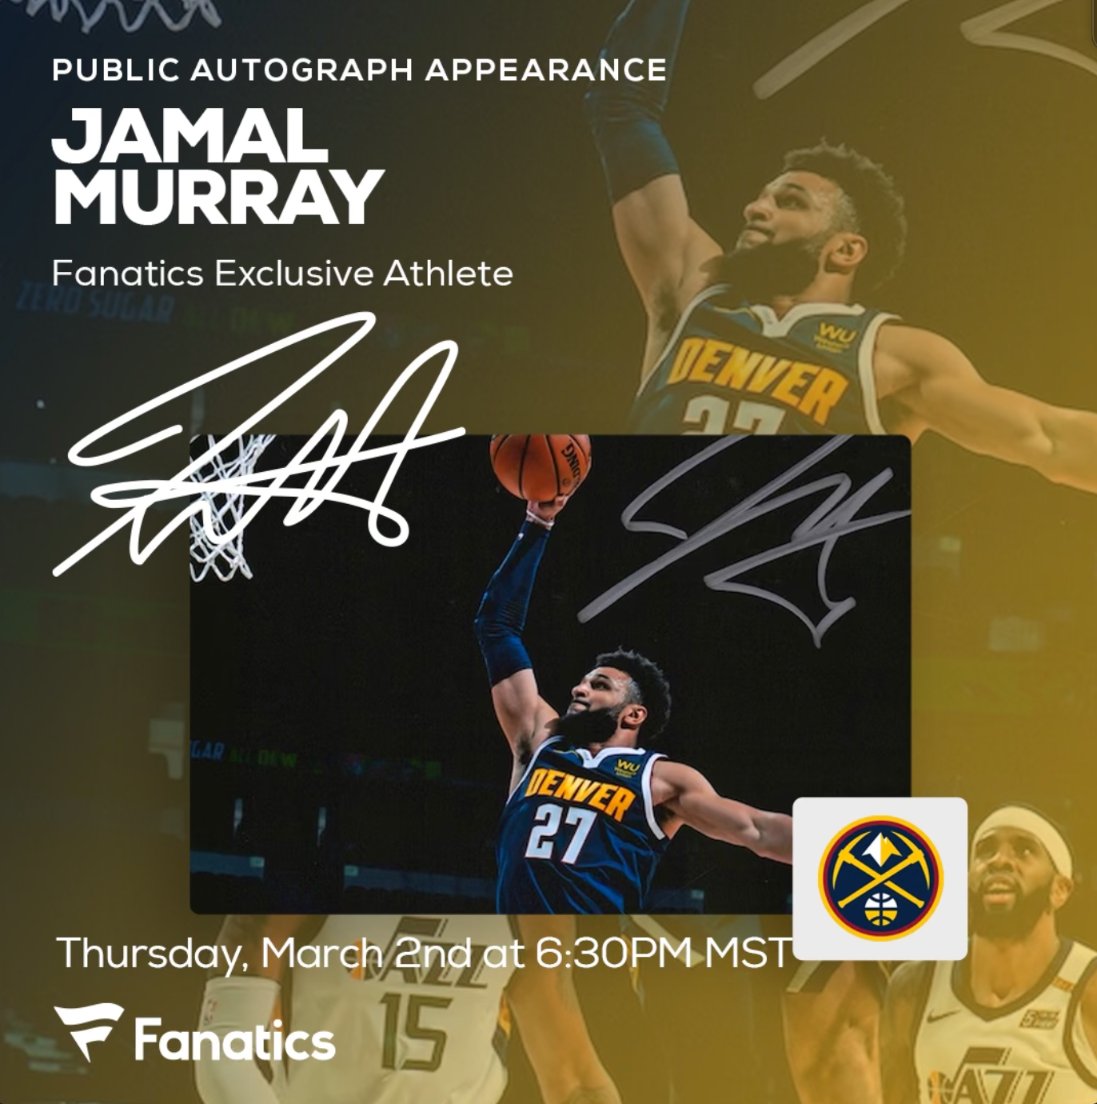 What’s up @nuggets fans, I'll be meeting fans and signing autographs ✍️ at Denver Autographs at 12540 W Cedar Drive Lakewood CO on Thurs. Mar. 2nd at 6:30pm MST! Looking forward to seeing you there! #FanaticsExclusive

To get tickets and learn more visit  bit.ly/3lWC9F6